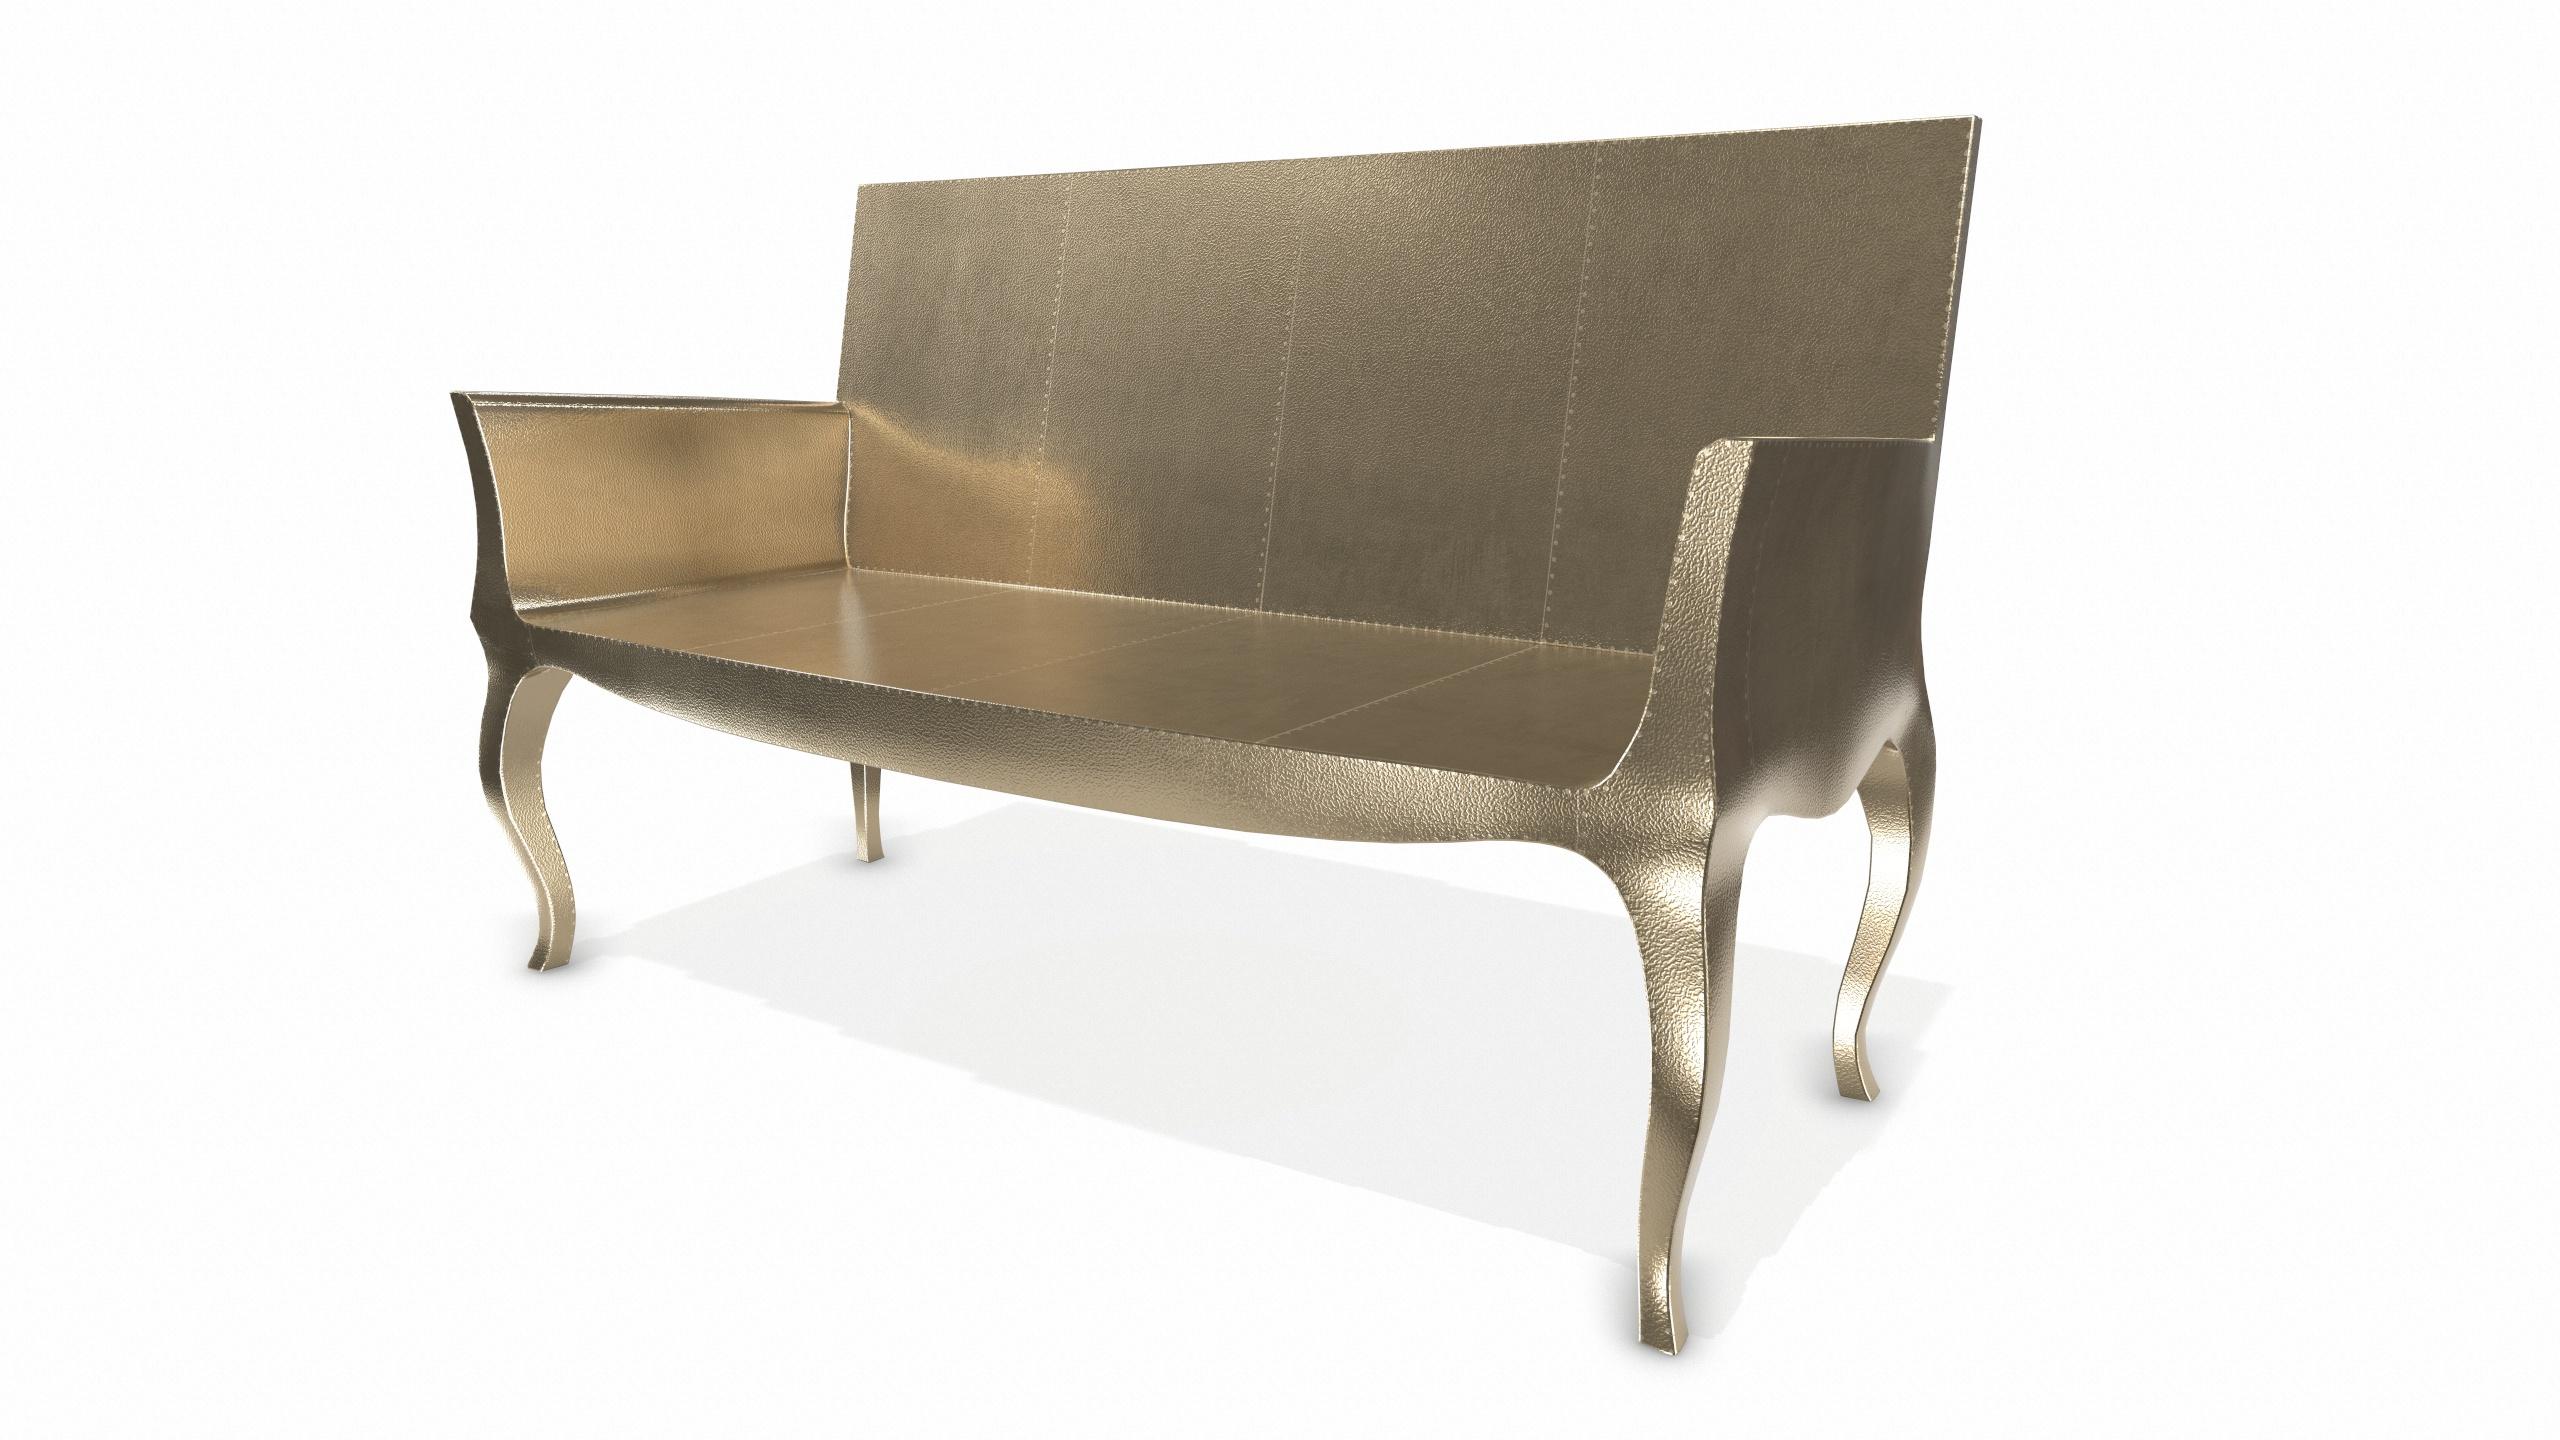 Wood Louise Settee Art Deco Chaise Longues in Fine Hammered Brass by Paul Mathieu For Sale